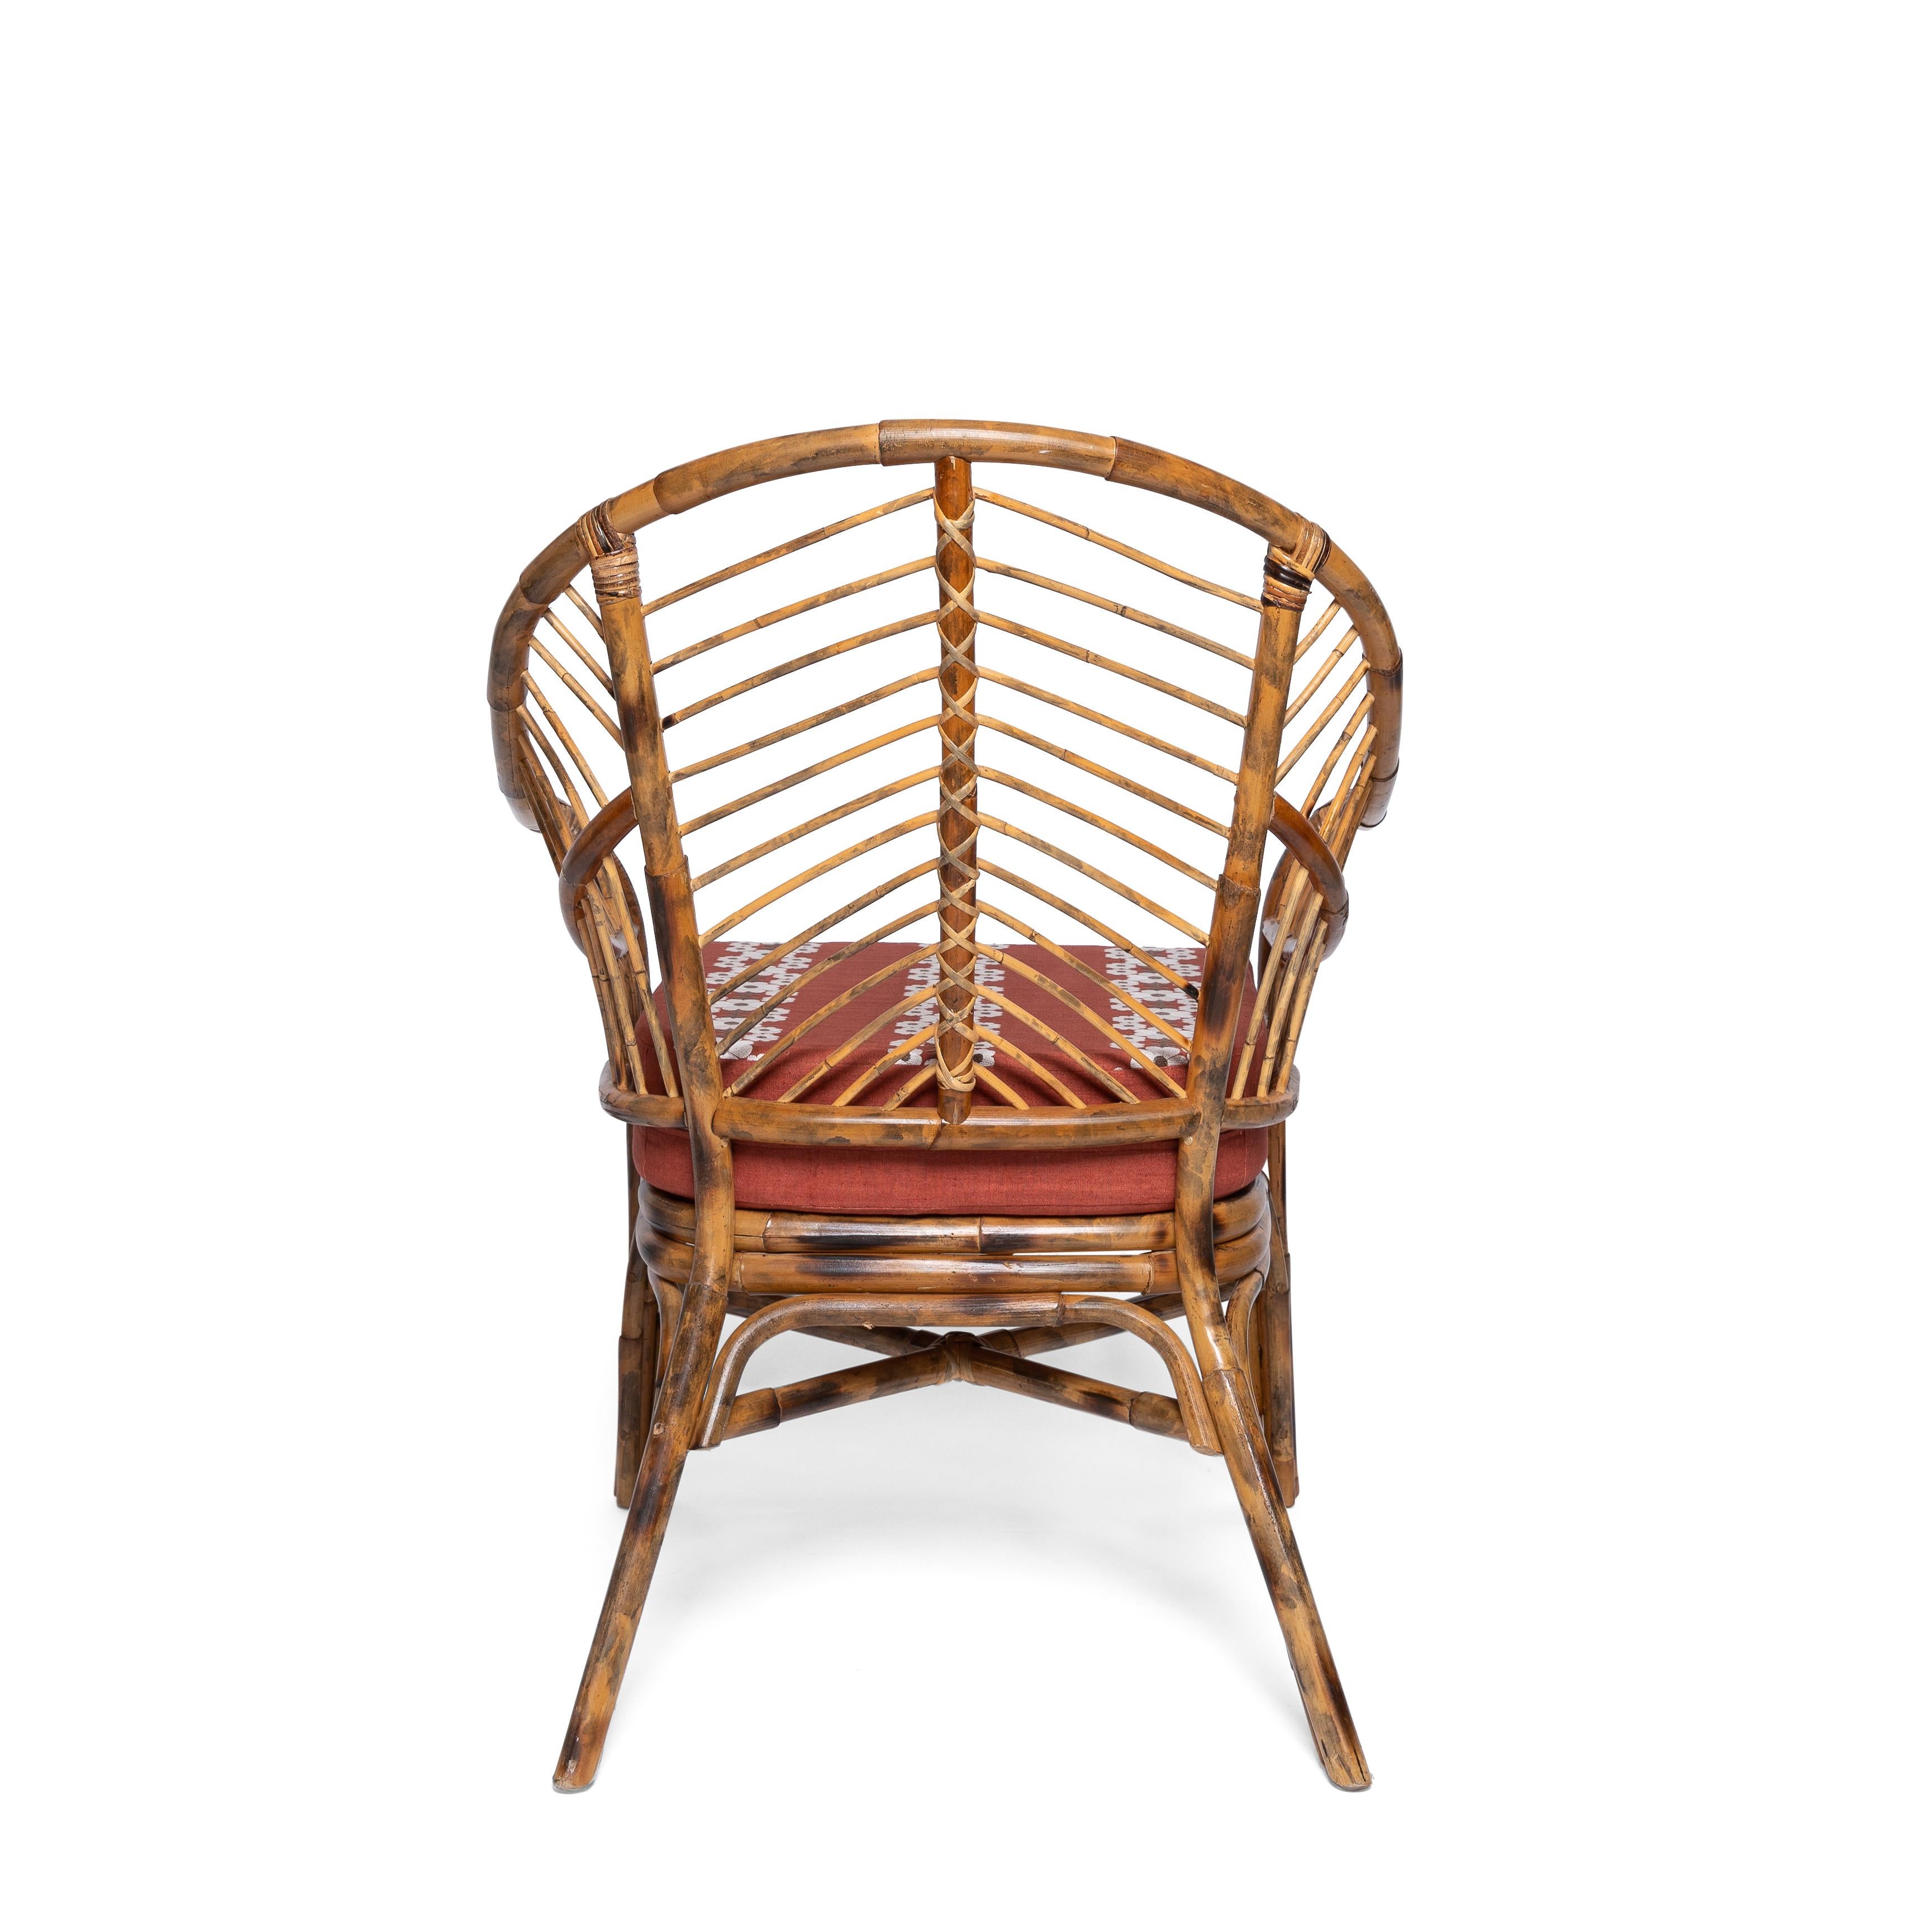 Contemporary Piolo Bamboo Chair in Natural Honey Rattan, Modern furniture by Louise Roe